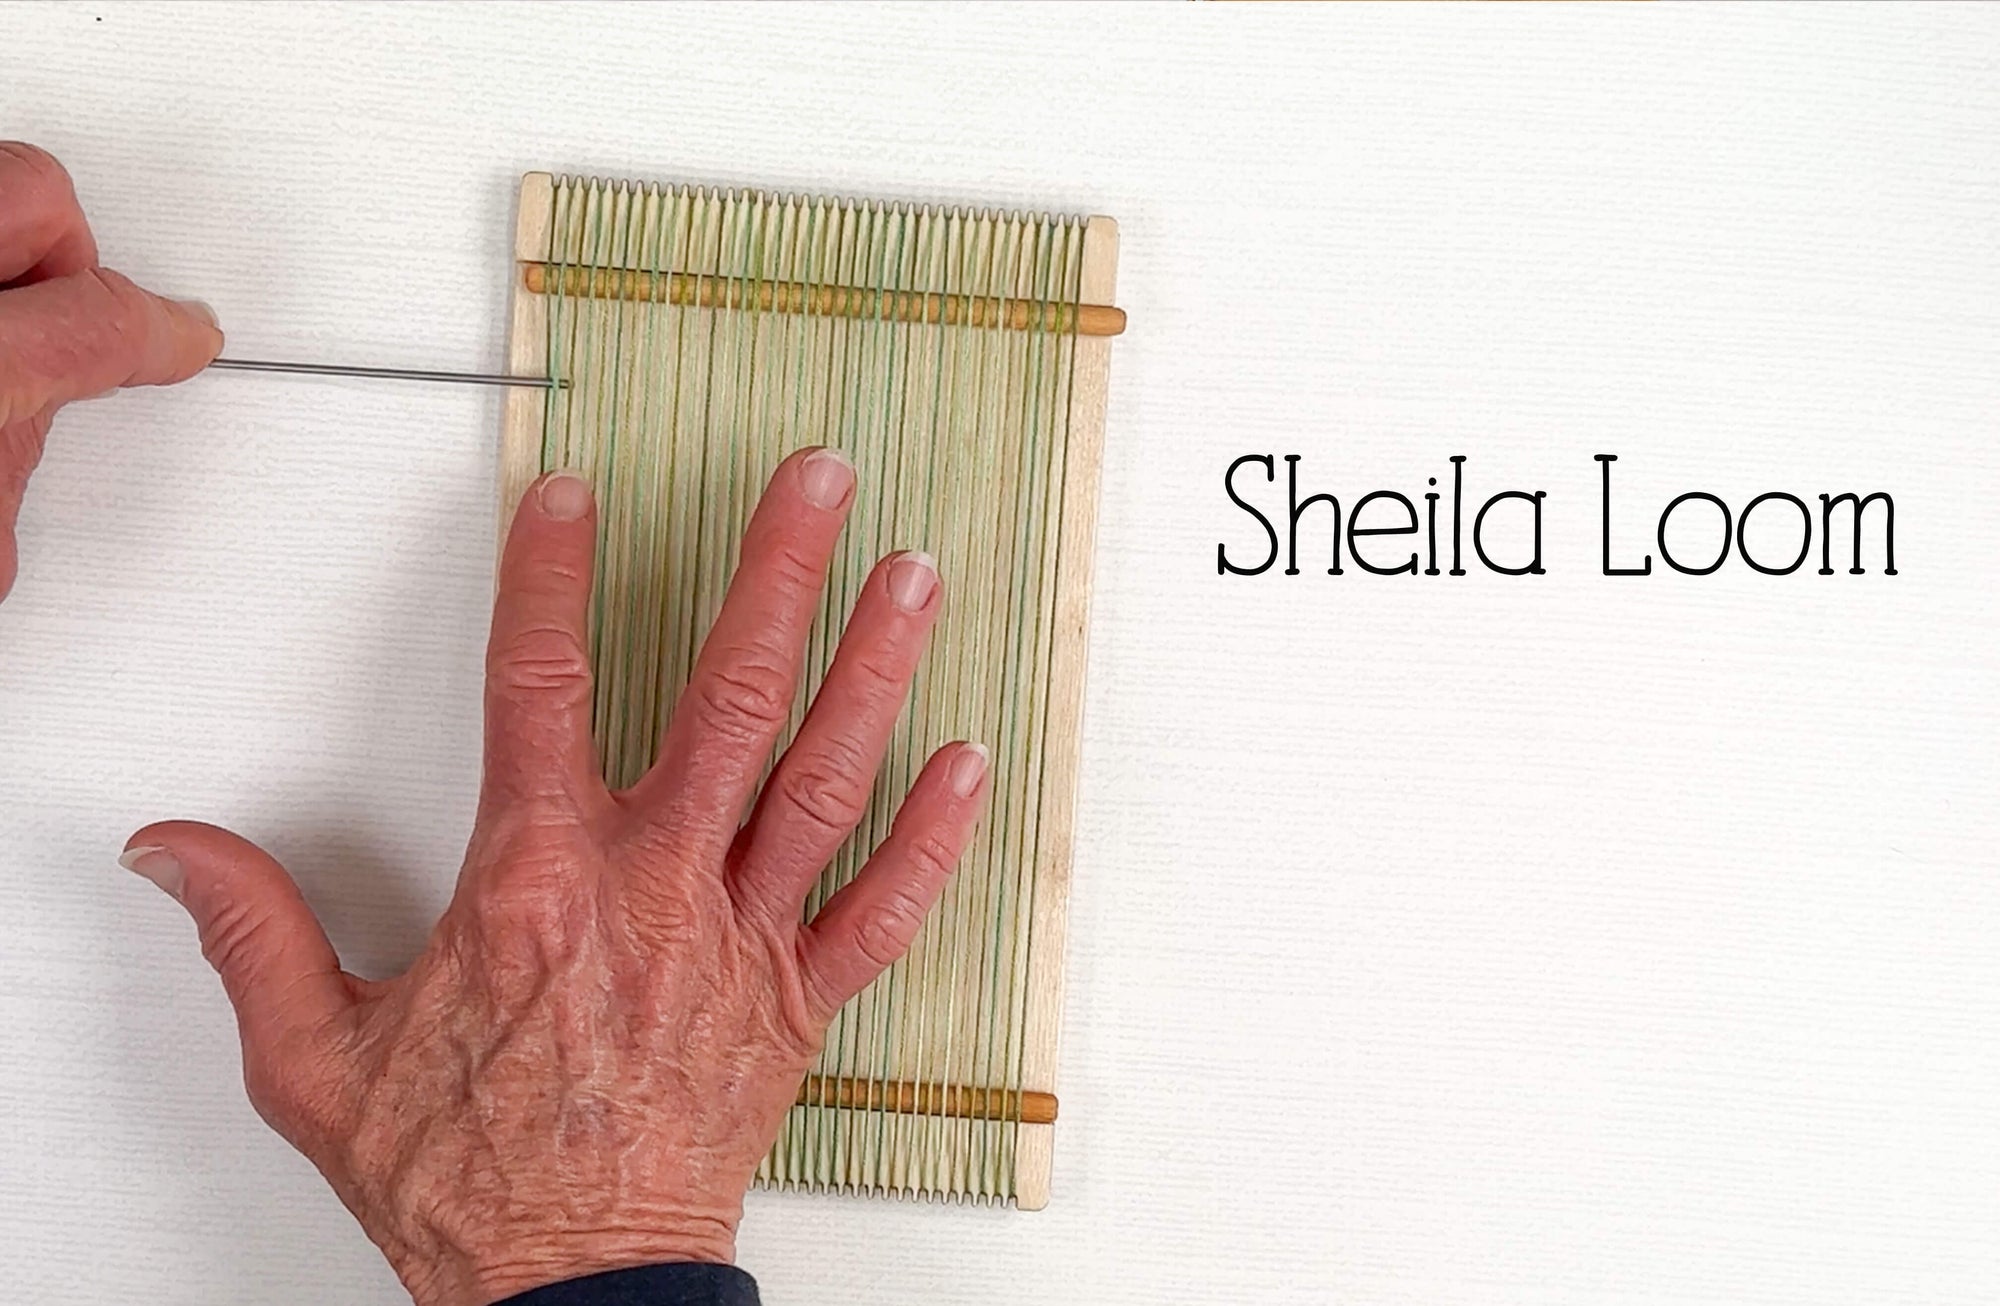 How to Use the Sheila Loom